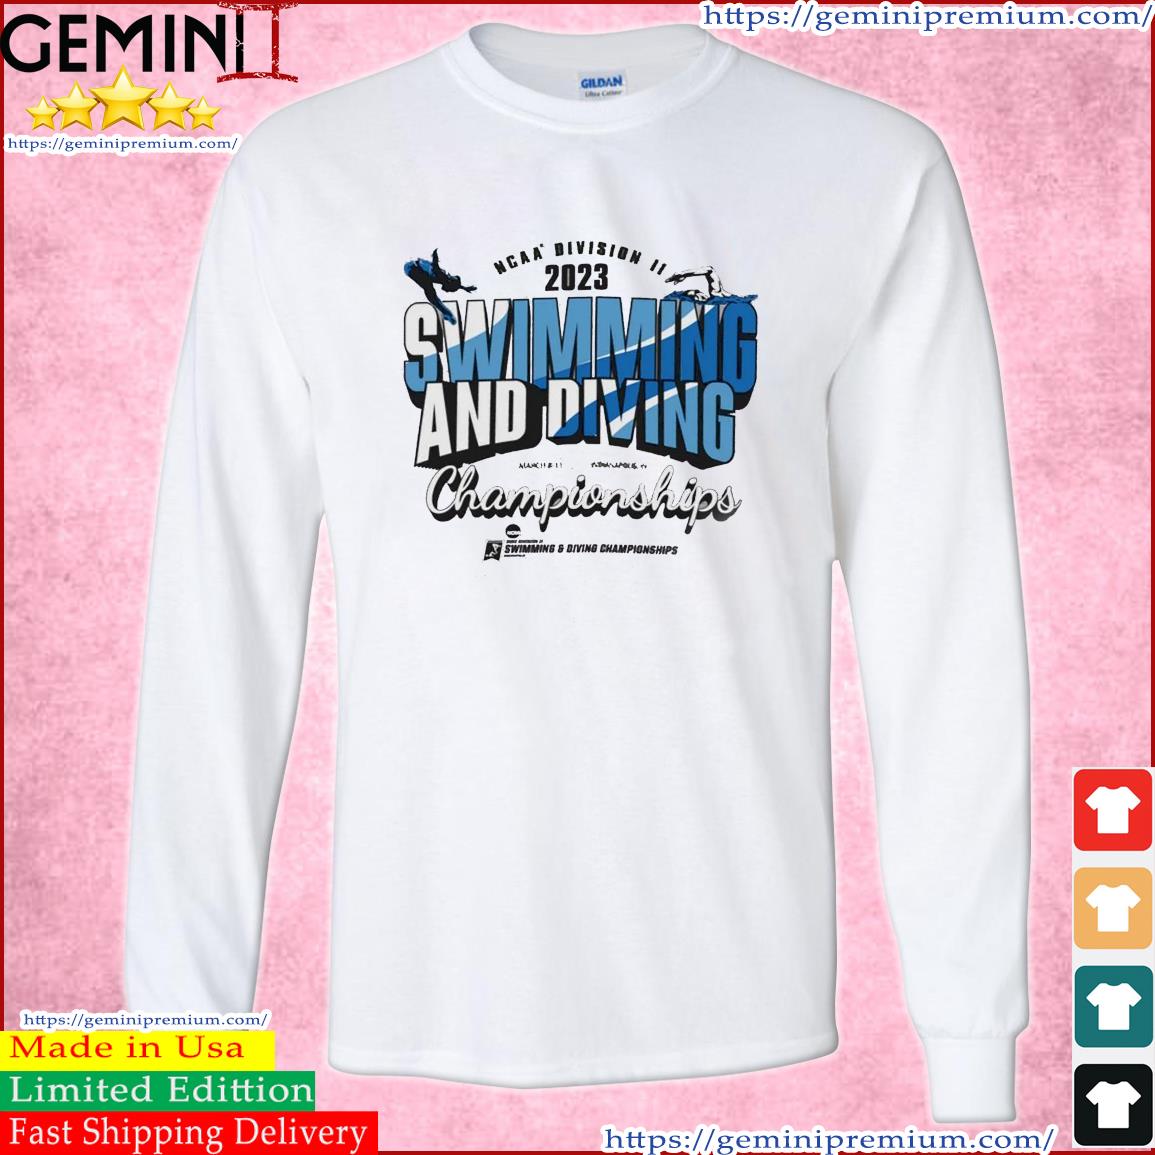 2023 Indianapolis March 8-11 NCAA Division II Swimming & Diving Championships Shirt Long Sleeve Tee